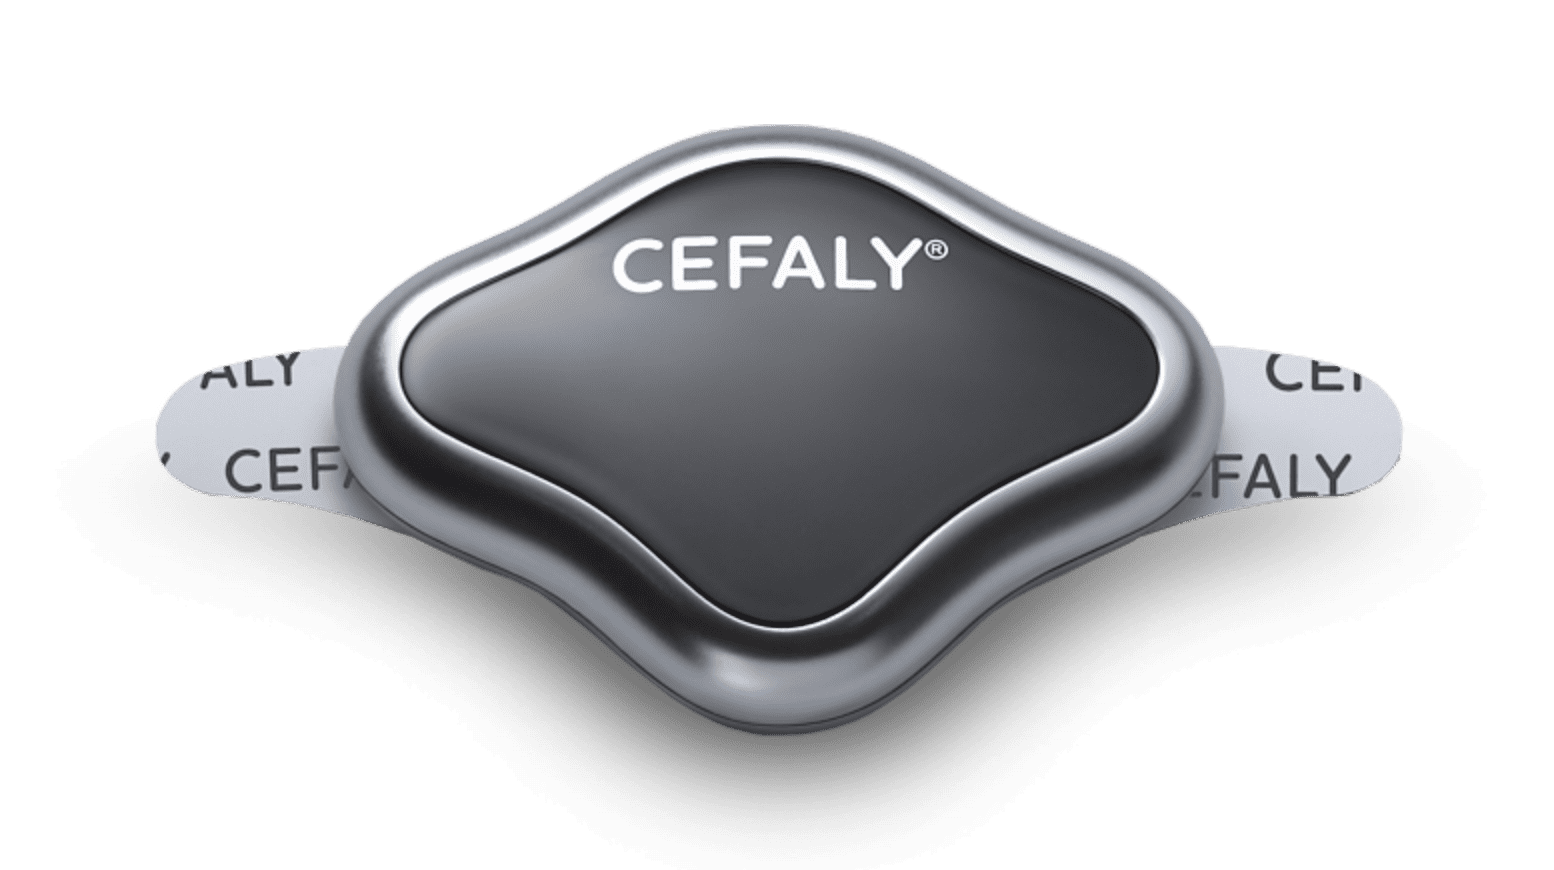  Cefaly Migraine treatment and prevention device with electrode laid out on work desk  5